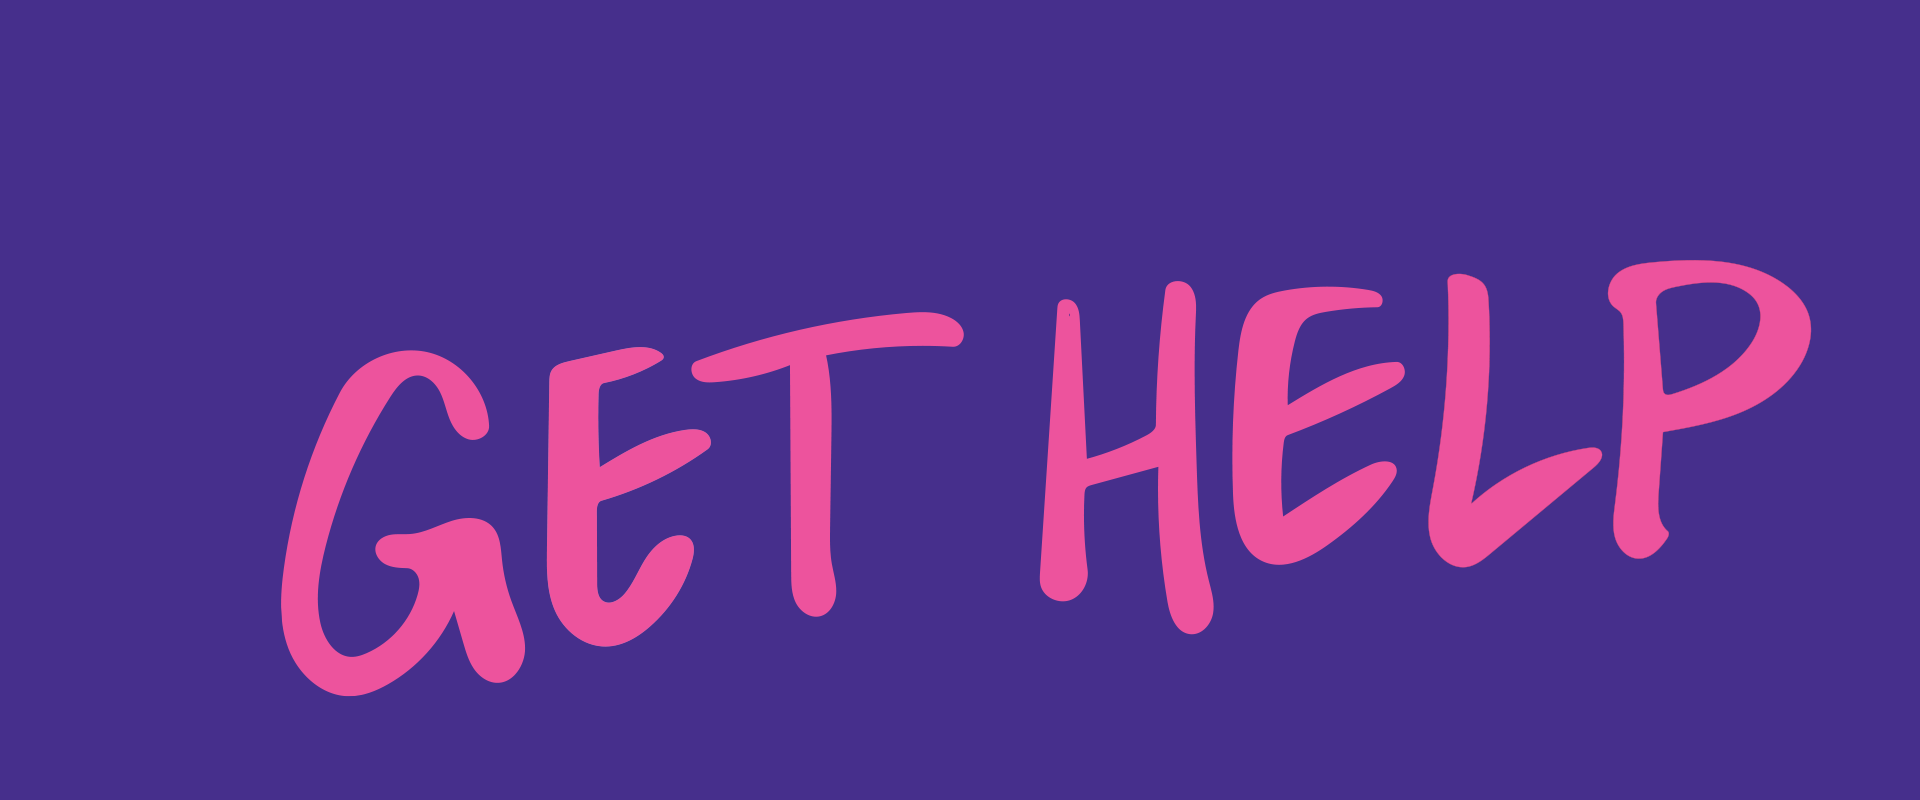 the words Get help written in pink on a purple background